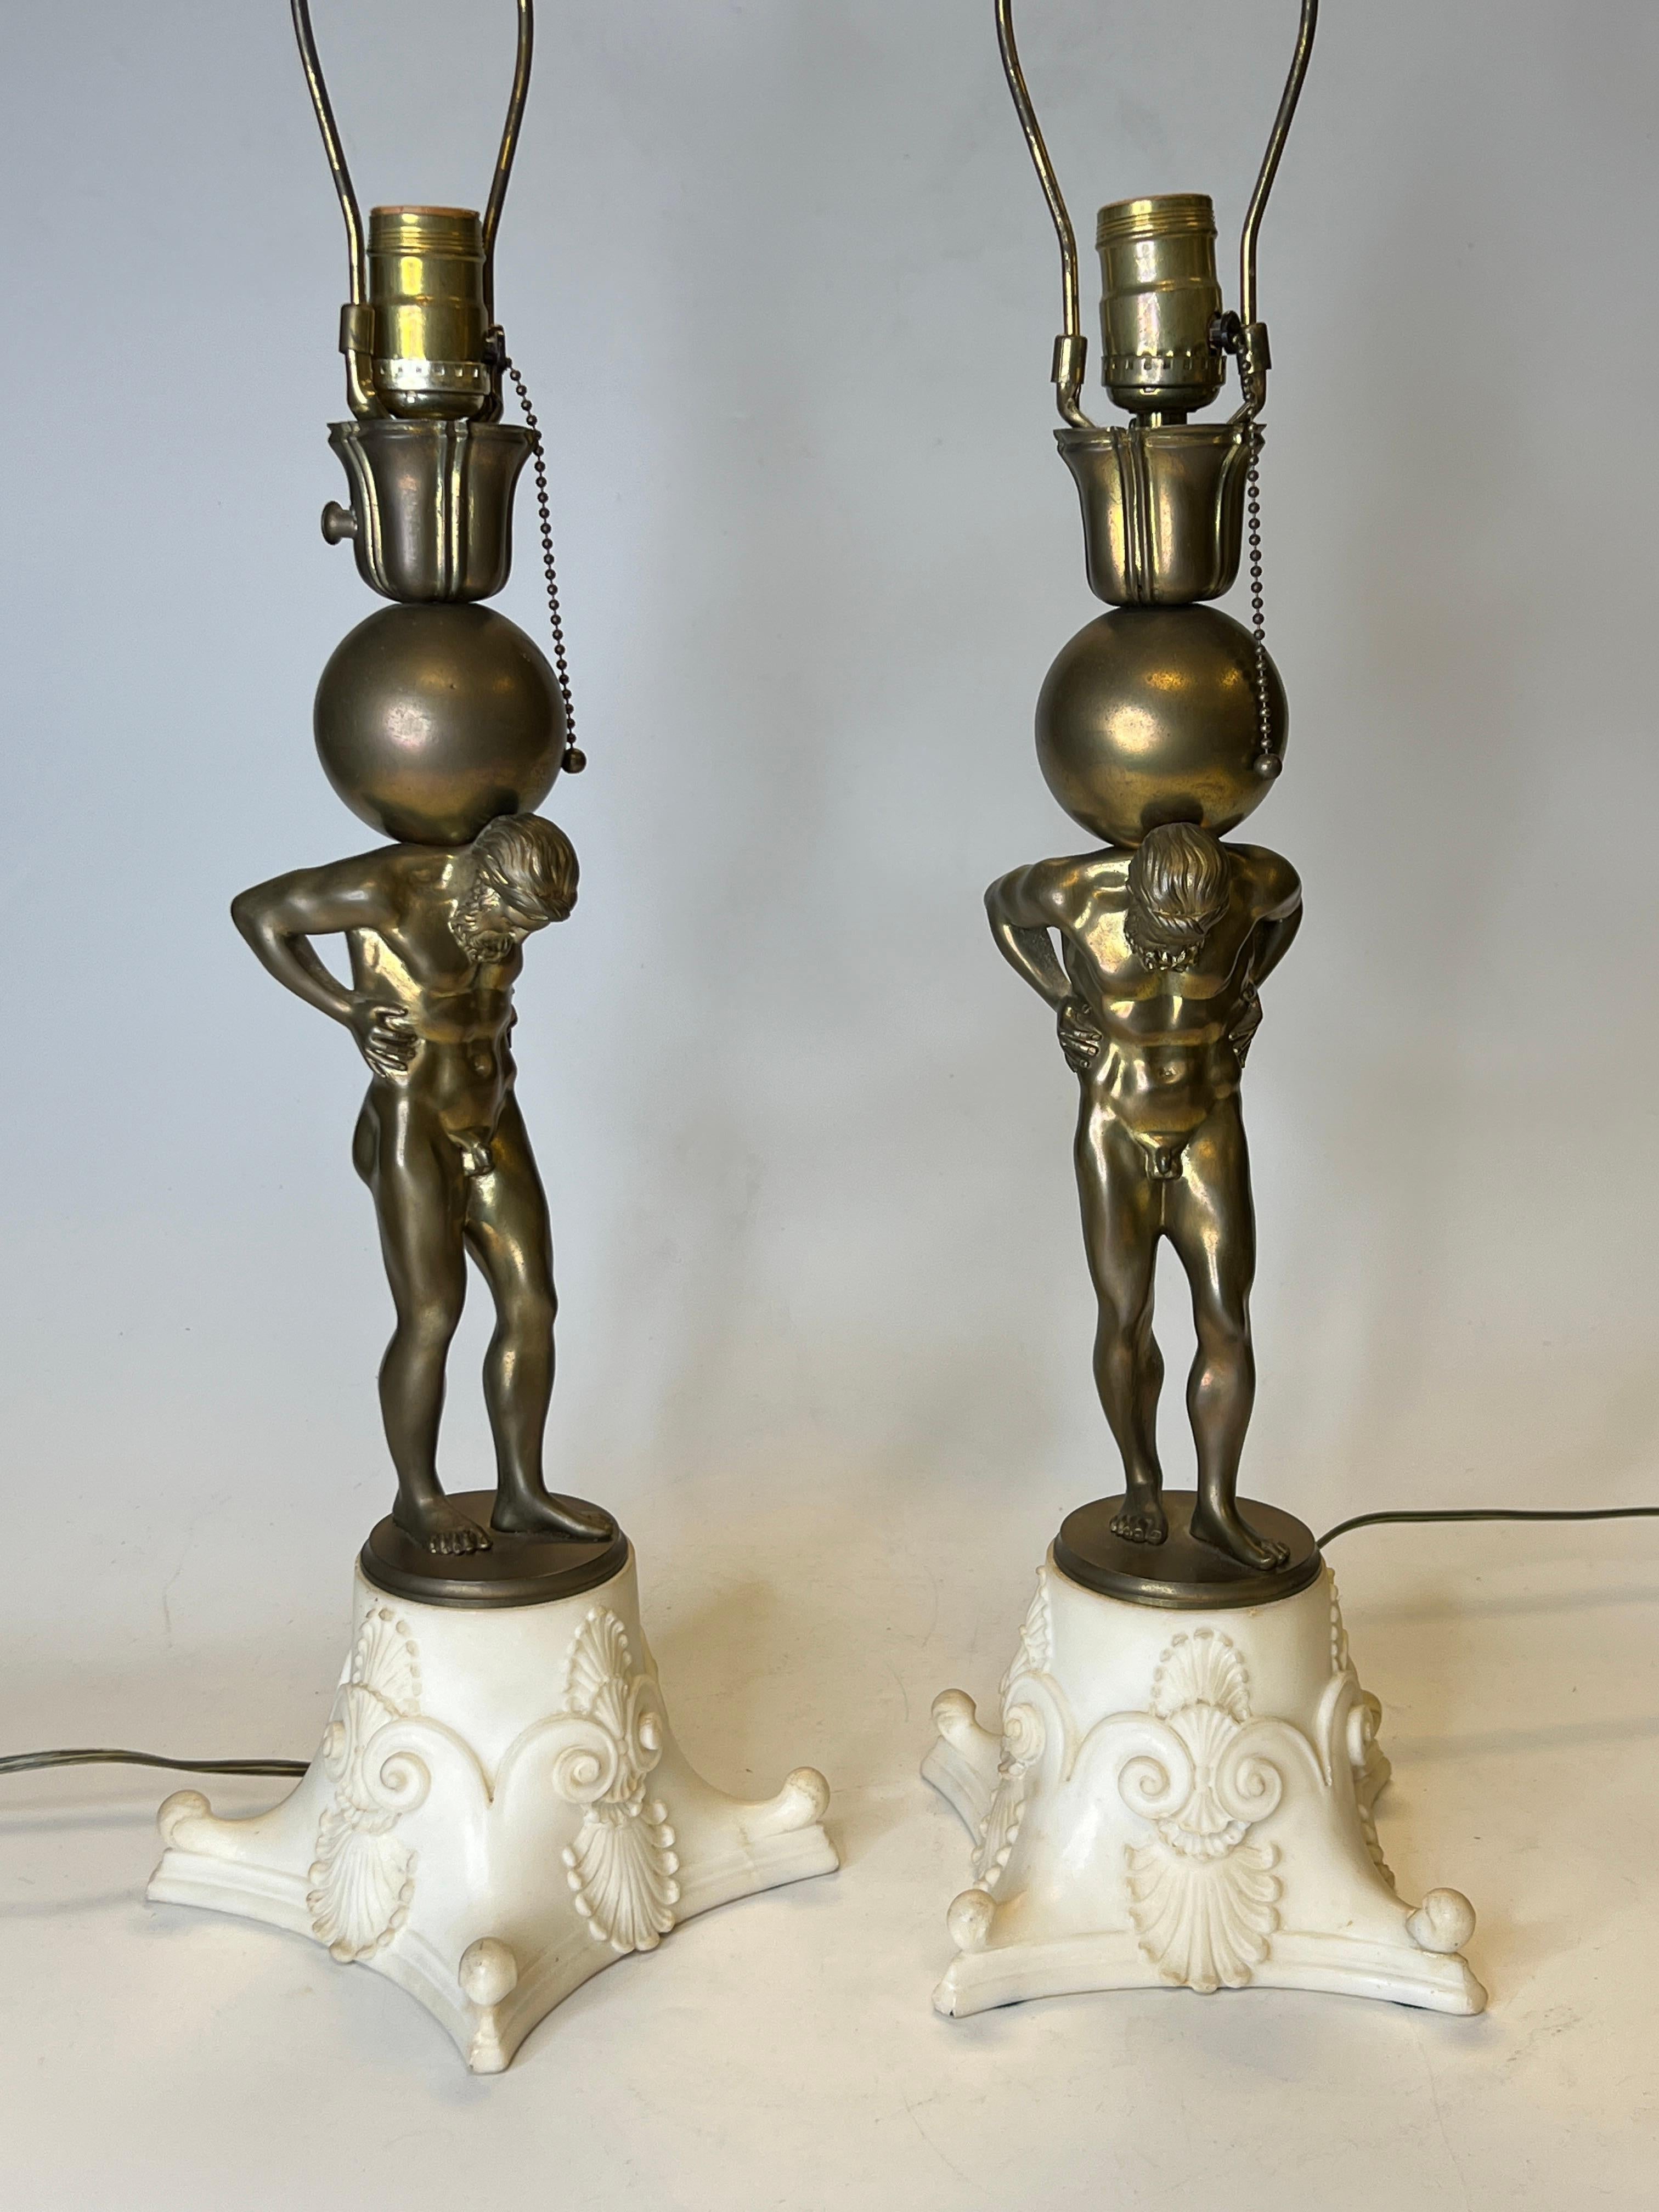 Pair of French bronze and marble figures of atlas mounted as table lamps.